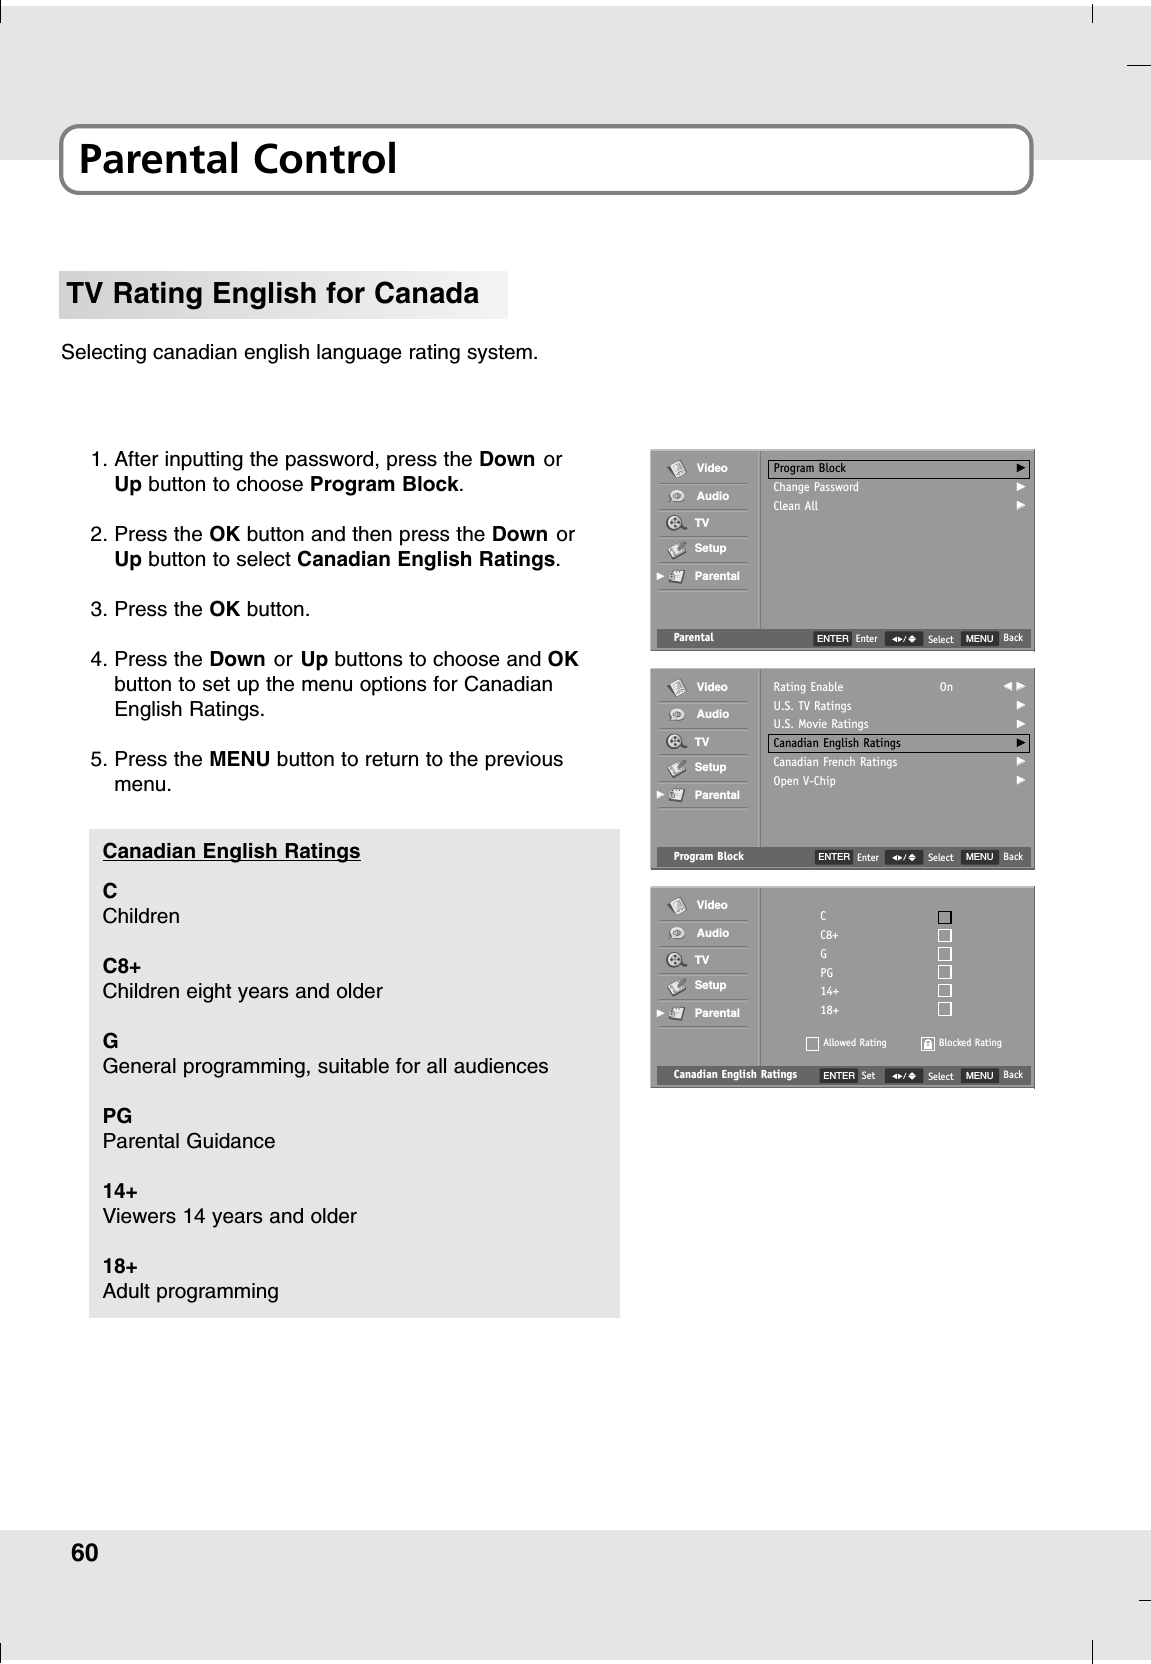 60Parental ControlTV Rating English for CanadaSelecting canadian english language rating system.1. After inputting the password, press the Down orUp button to choose Program Block.2. Press the OK button and then press the Down orUp button to select Canadian English Ratings.3. Press the OK button.4. Press the Down or Up buttons to choose and OKbutton to set up the menu options for CanadianEnglish Ratings.5. Press the MENU button to return to the previousmenu.Canadian English Ratings MENU BackSelectCC8+GPG14+18+Allowed RatingVideoAudioTVSetupParentalGGBlocked RatingENTER SetCChildrenC8+Children eight years and olderGGeneral programming, suitable for all audiencesPGParental Guidance 14+Viewers 14 years and older18+Adult programmingCanadian English Ratings Program Block MENU BackSelectRating EnableU.S. TV RatingsU.S. Movie RatingsCanadian English RatingsCanadian French RatingsOpen V-ChipOn FF  GGGGGGGGGGGGVideoAudioTVSetupParentalGGParental MENU BackSelectProgram BlockChange PasswordClean AllGGGGGGVideoAudioTVSetupParentalGGENTER EnterENTER Enter